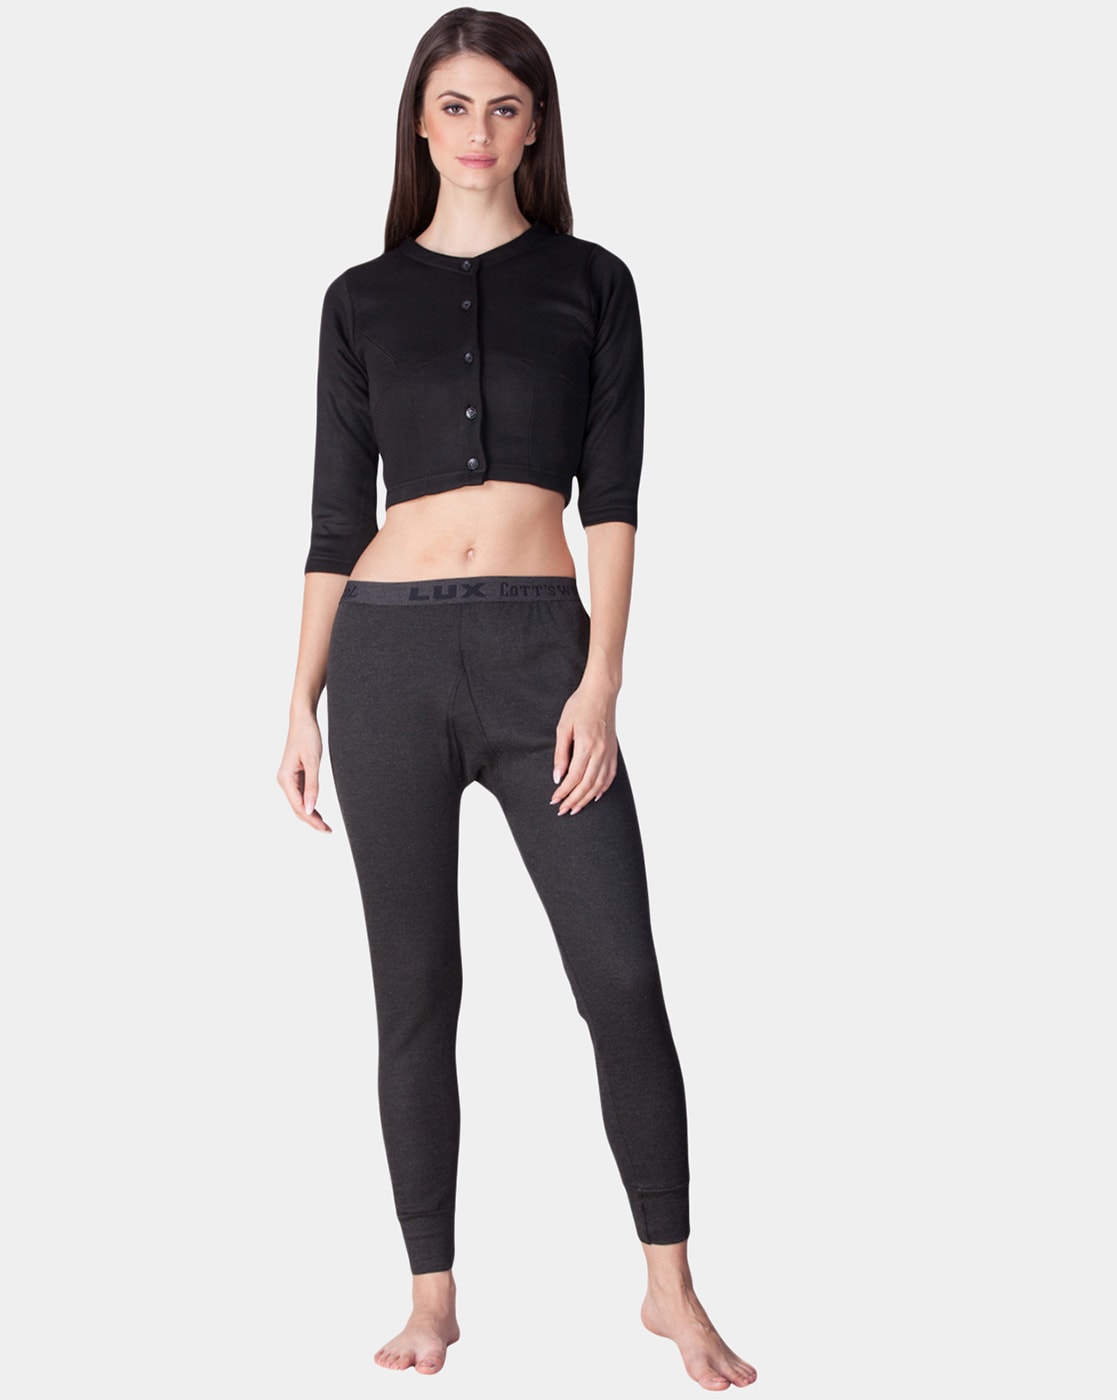 Buy lux lyra winter leggings for womens in India @ Limeroad | page 2